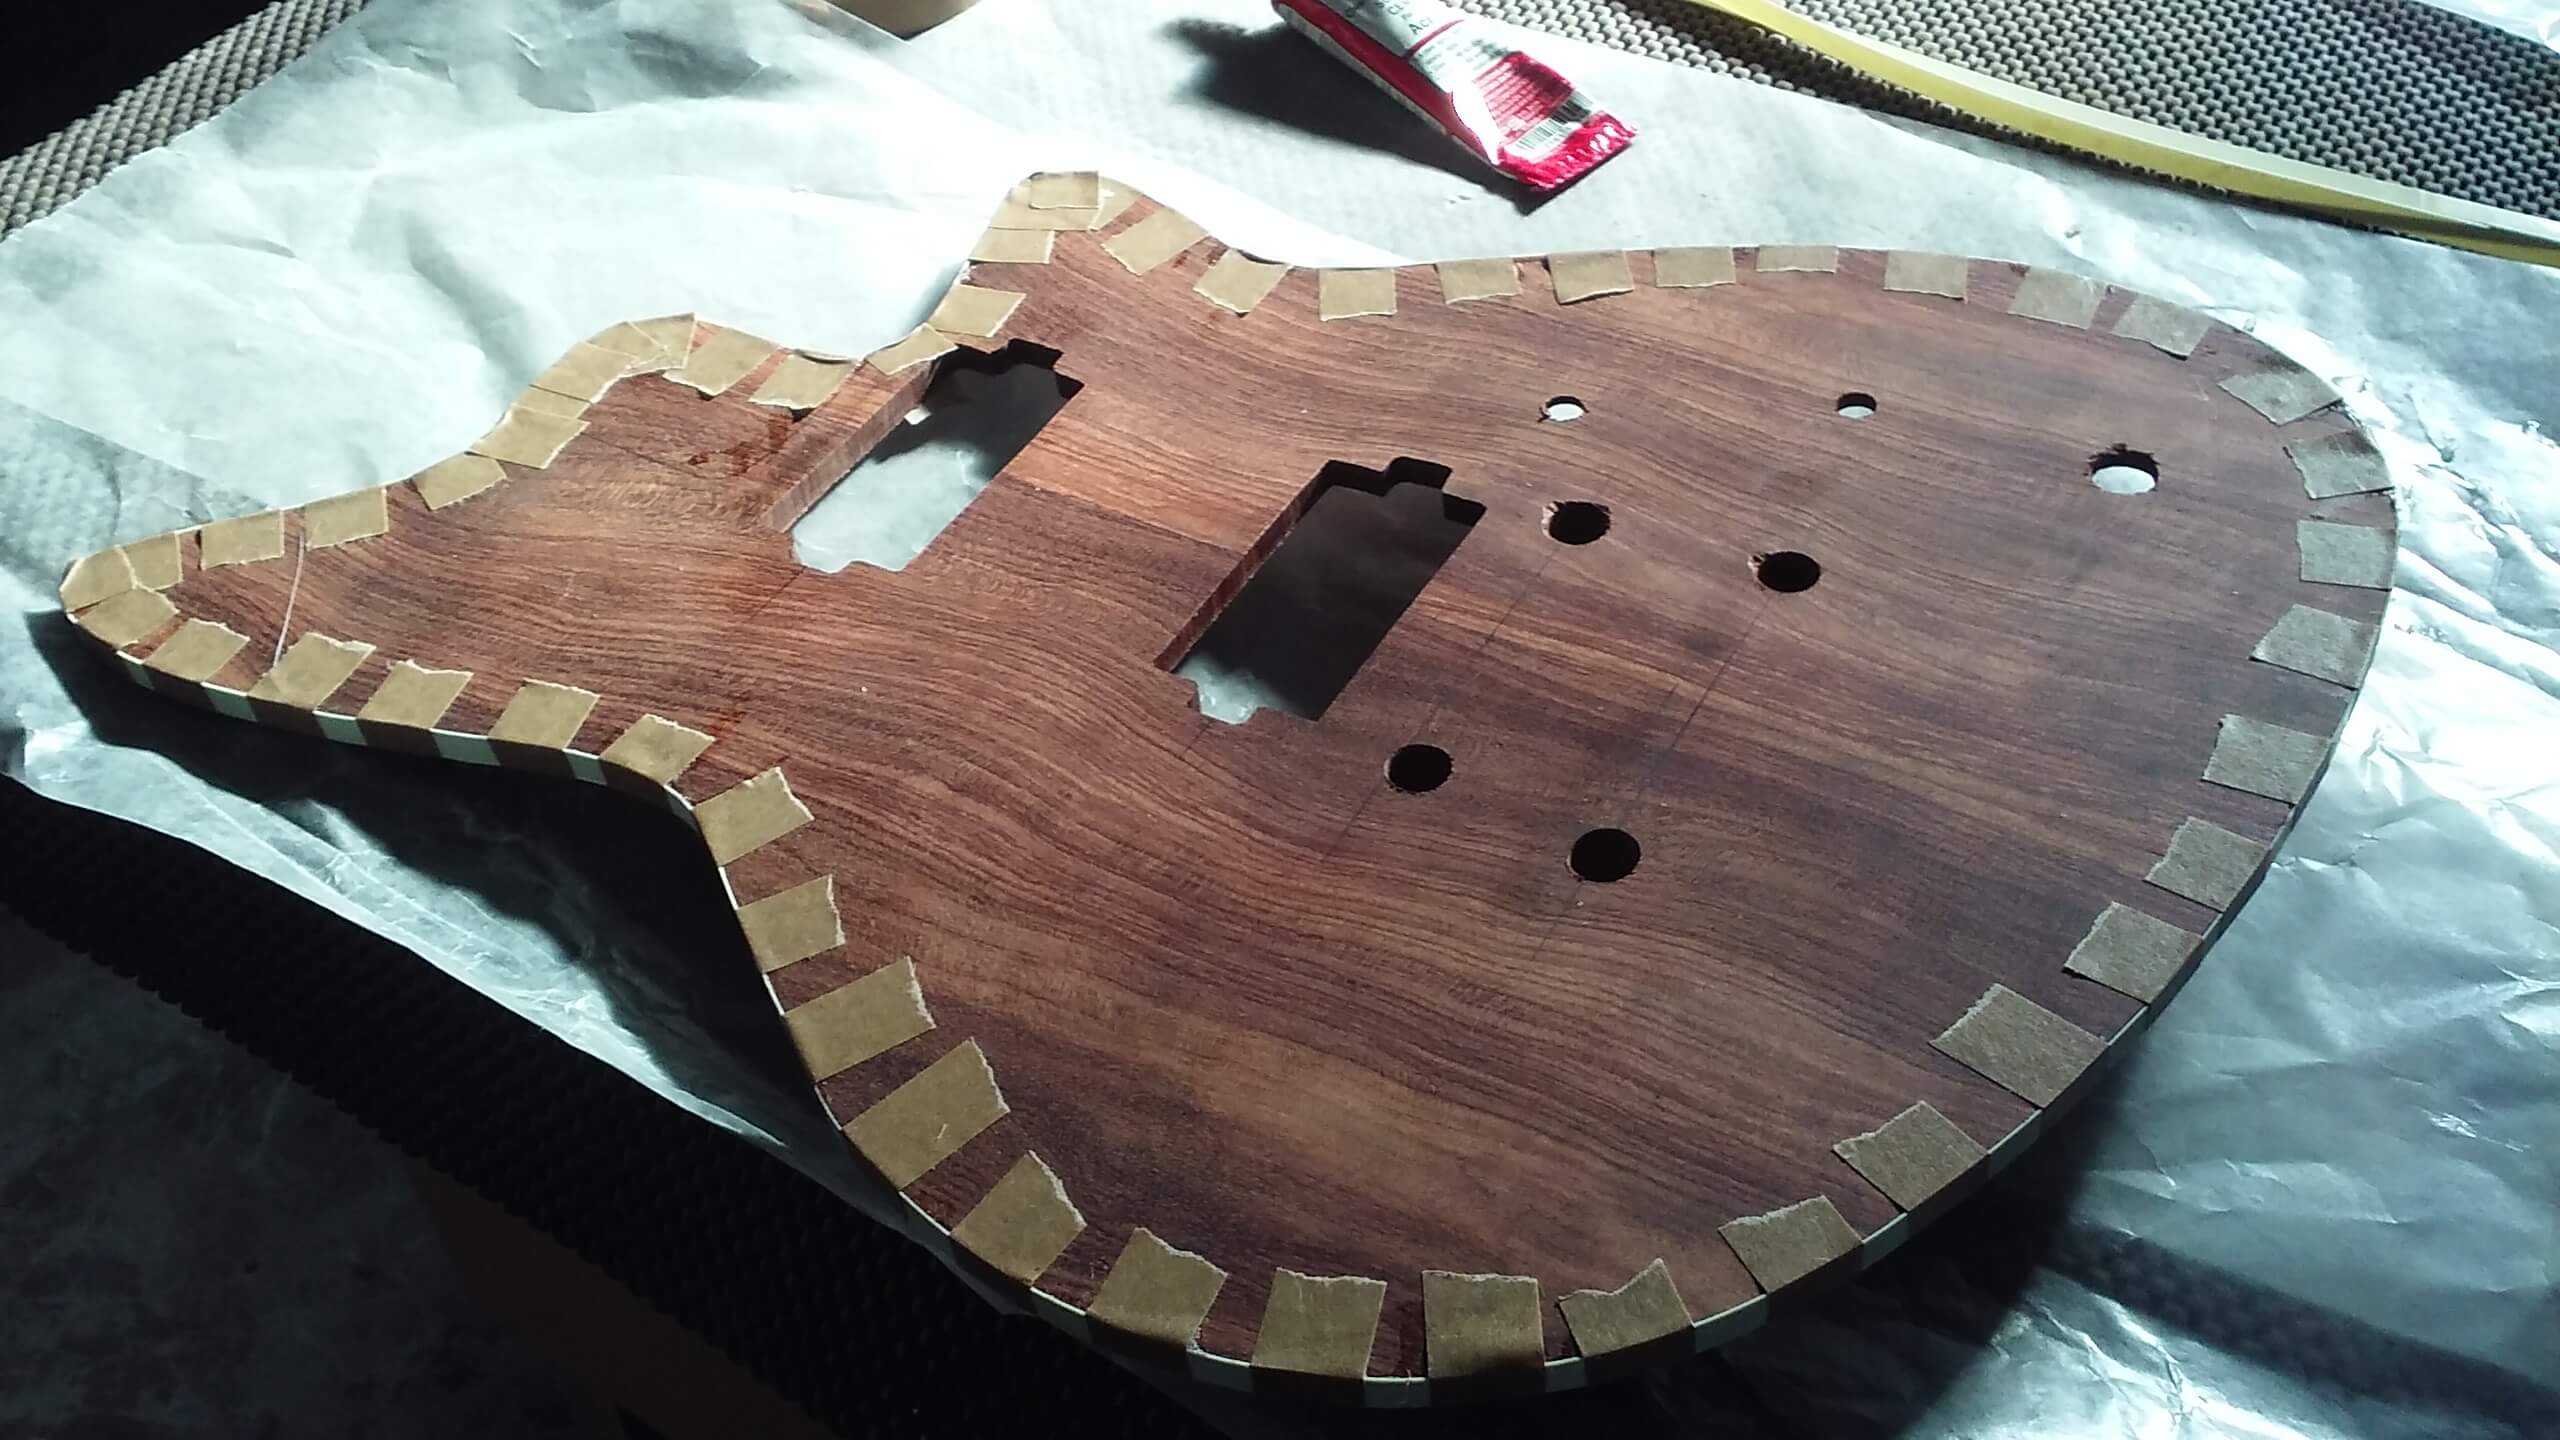 Gluing binding to the front of the guitar.